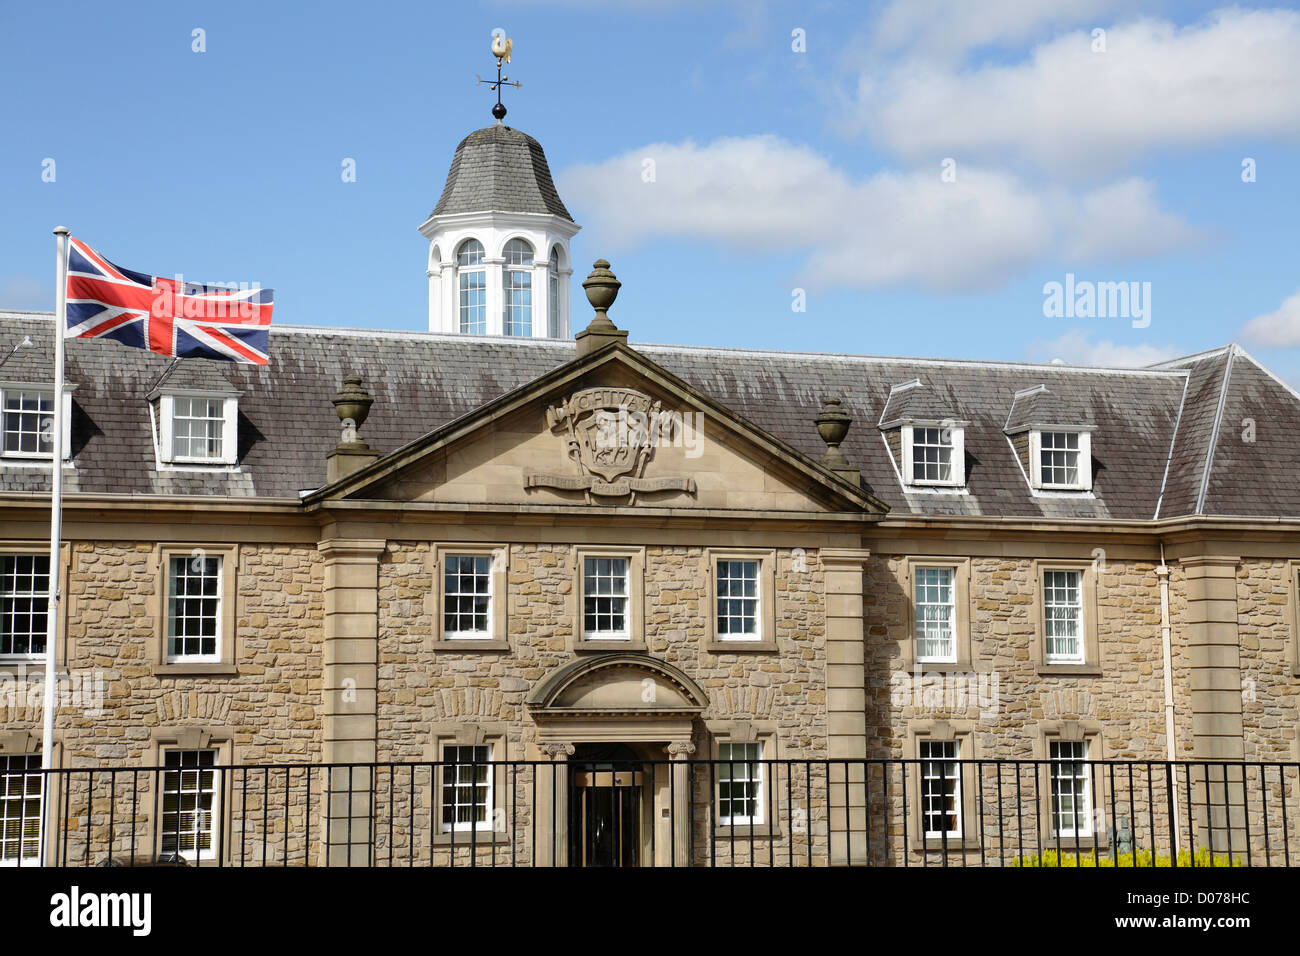 This site is permanently closed. Office building at Chivas Regal whisky company on Renfrew Road in Paisley, Renfrewshire, Scotland, UK Stock Photo